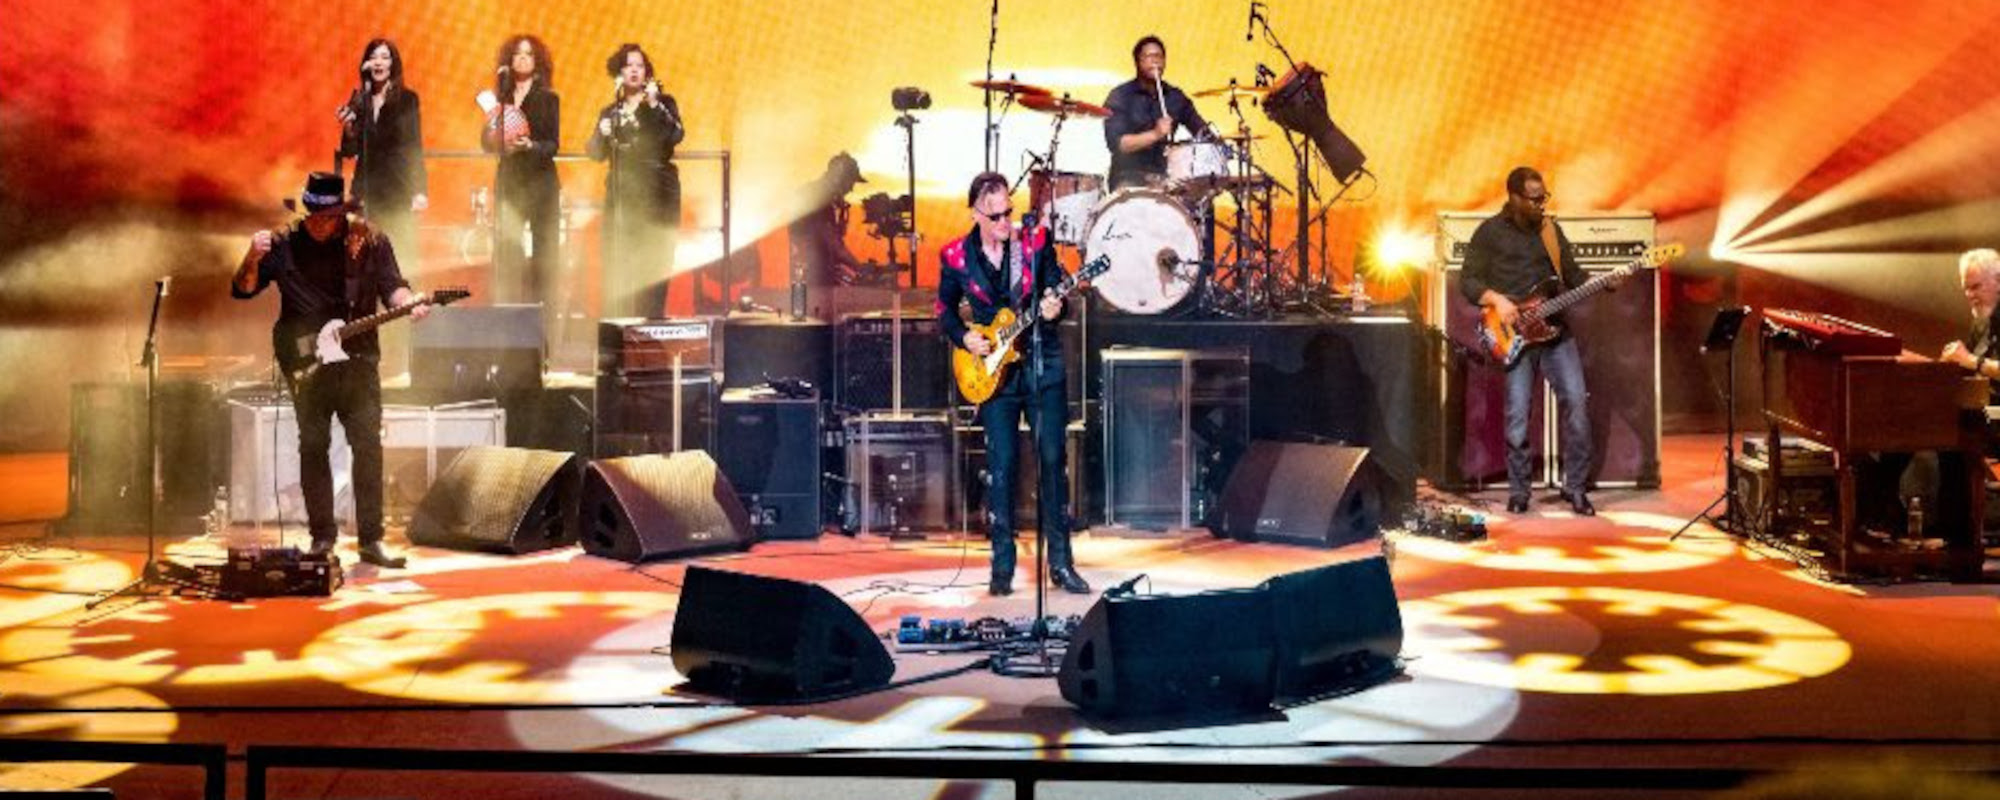 Missed Joe Bonamassa On His Last Tour? The Live ‘Tales of Time’ Puts You In The Front Row